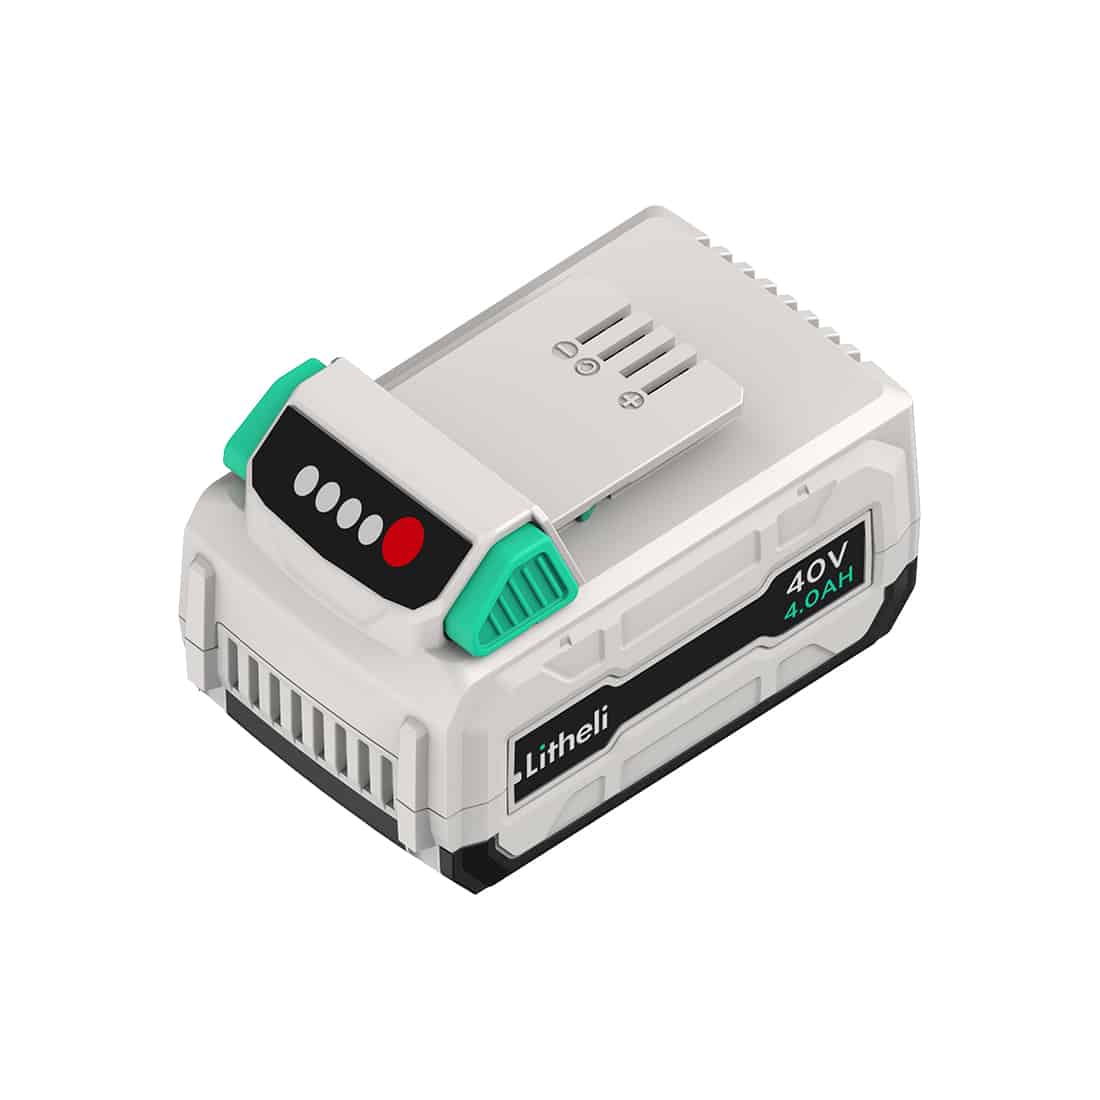 Litheli 40V 4.0Ah Lithium Ion Battery Pack